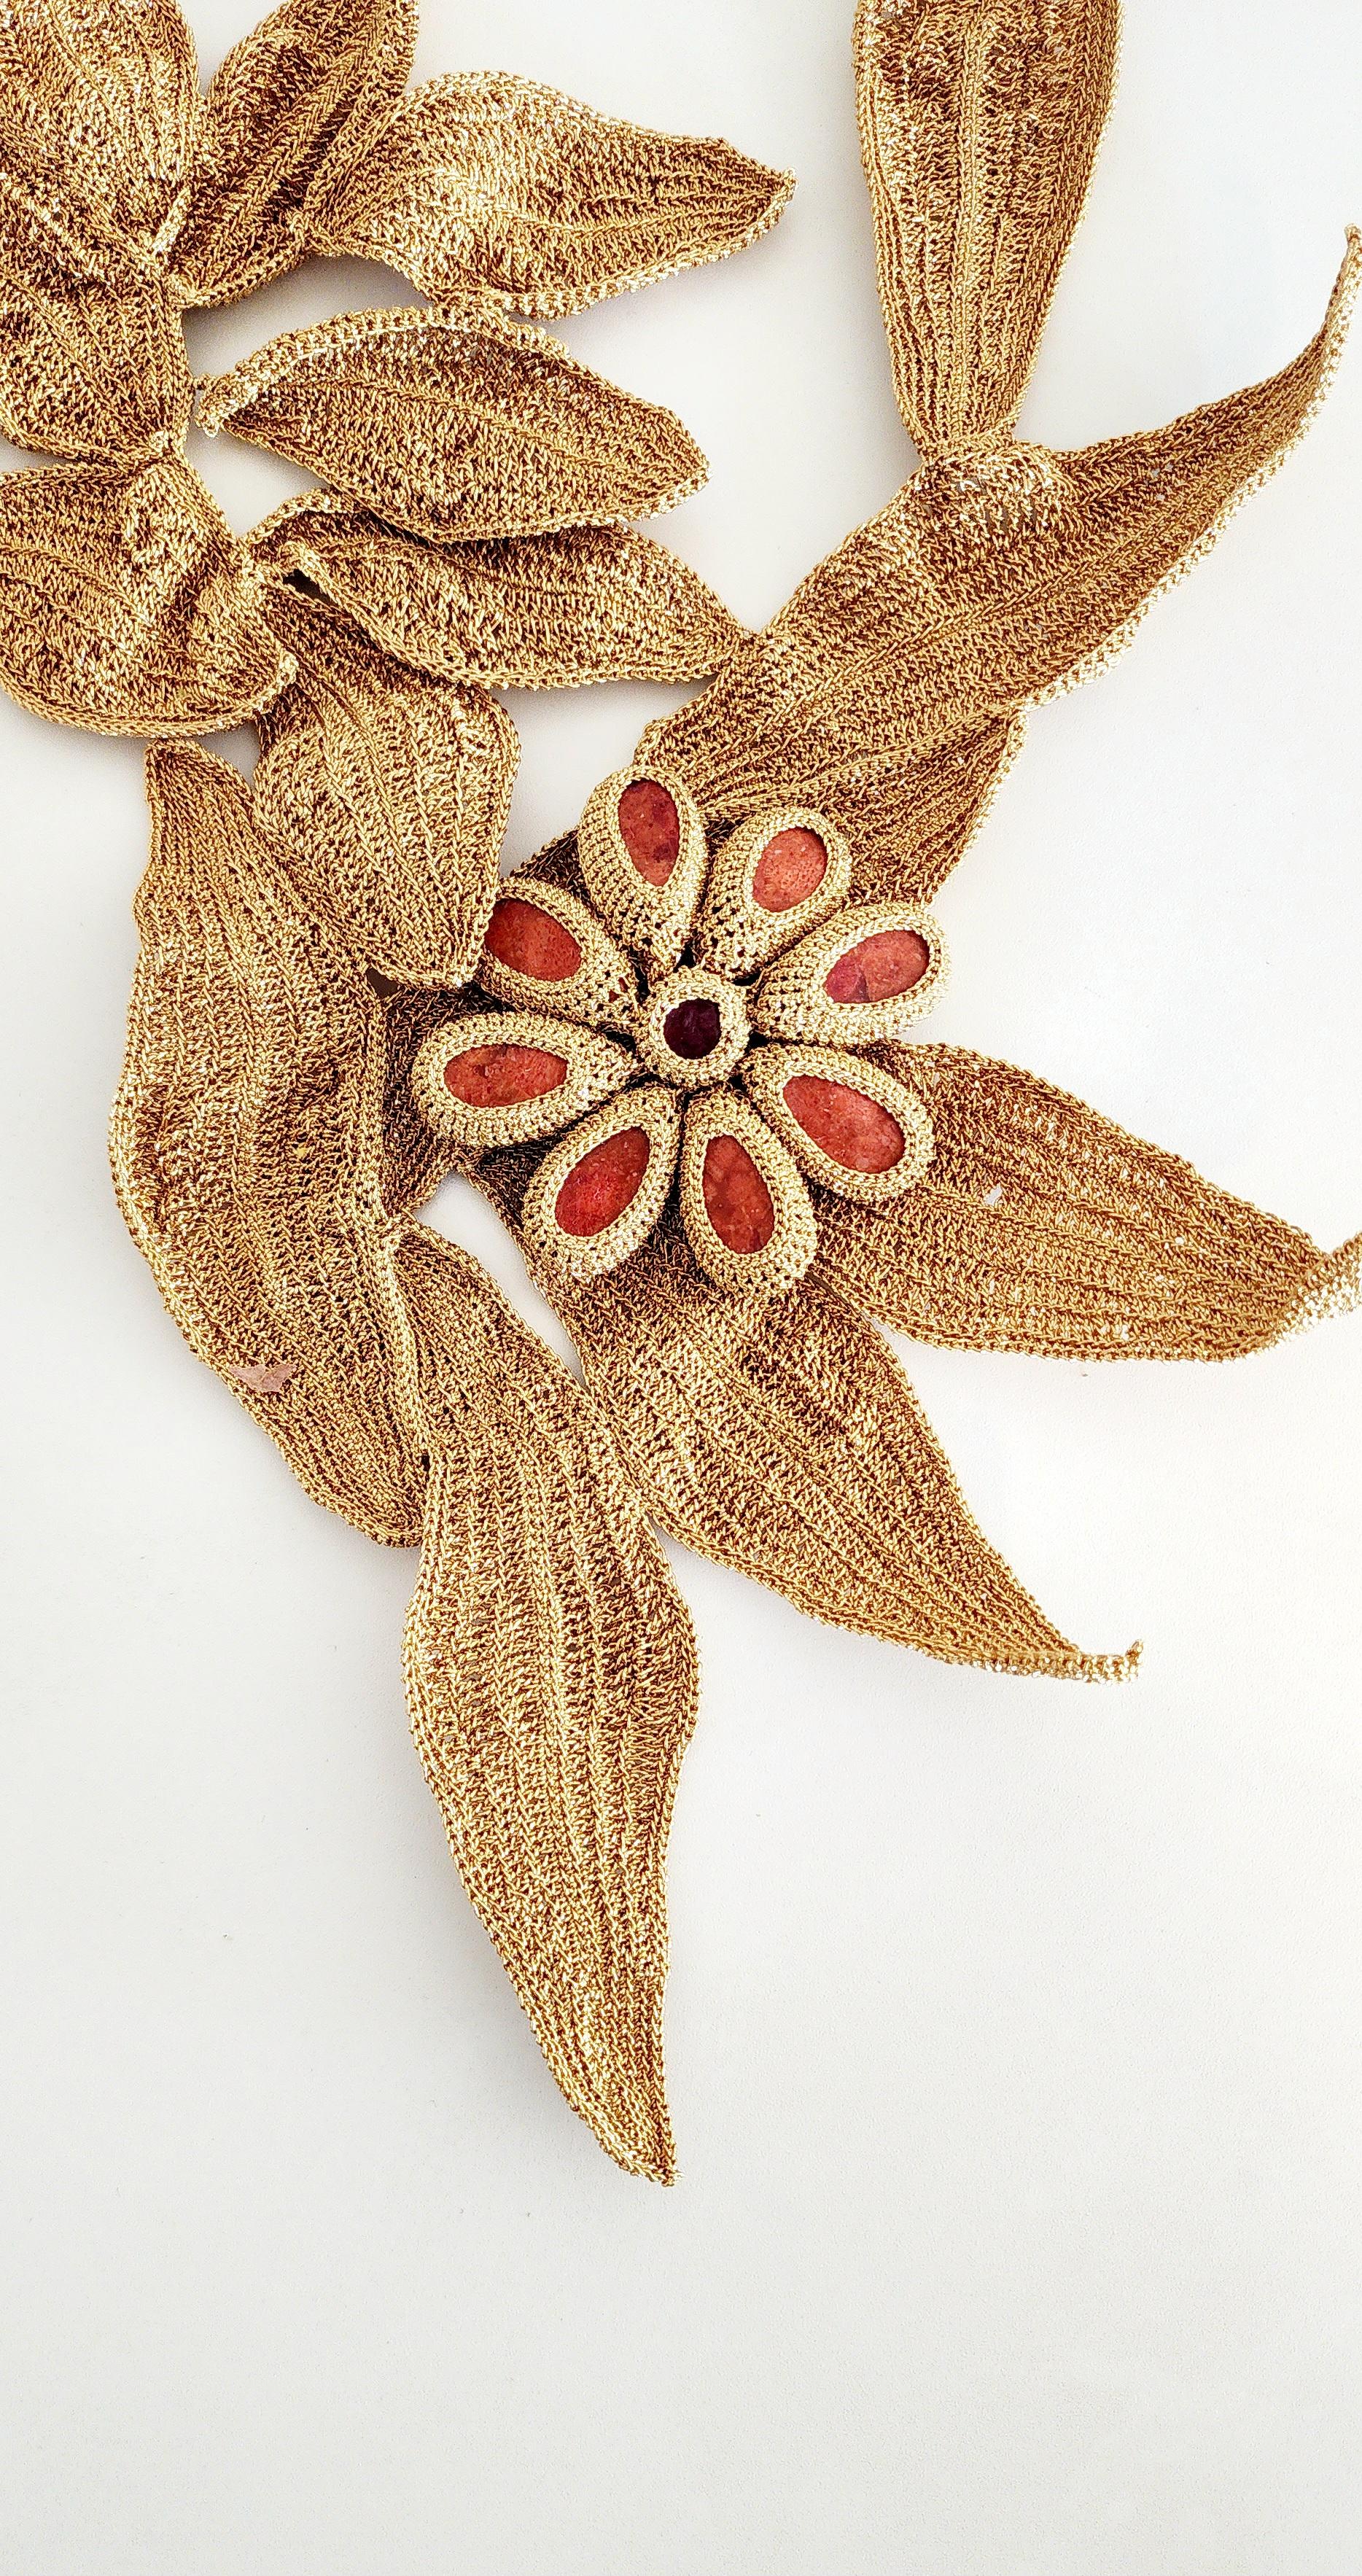 A wonderfully sculptural Necklace. It is Crochet with dark golden smooth passing thread with red coral stones. This is a statement piece. Nature is the inspiration for this one of a kind piece. Autumn leaves and autumn colors. Intricately Crochet. 